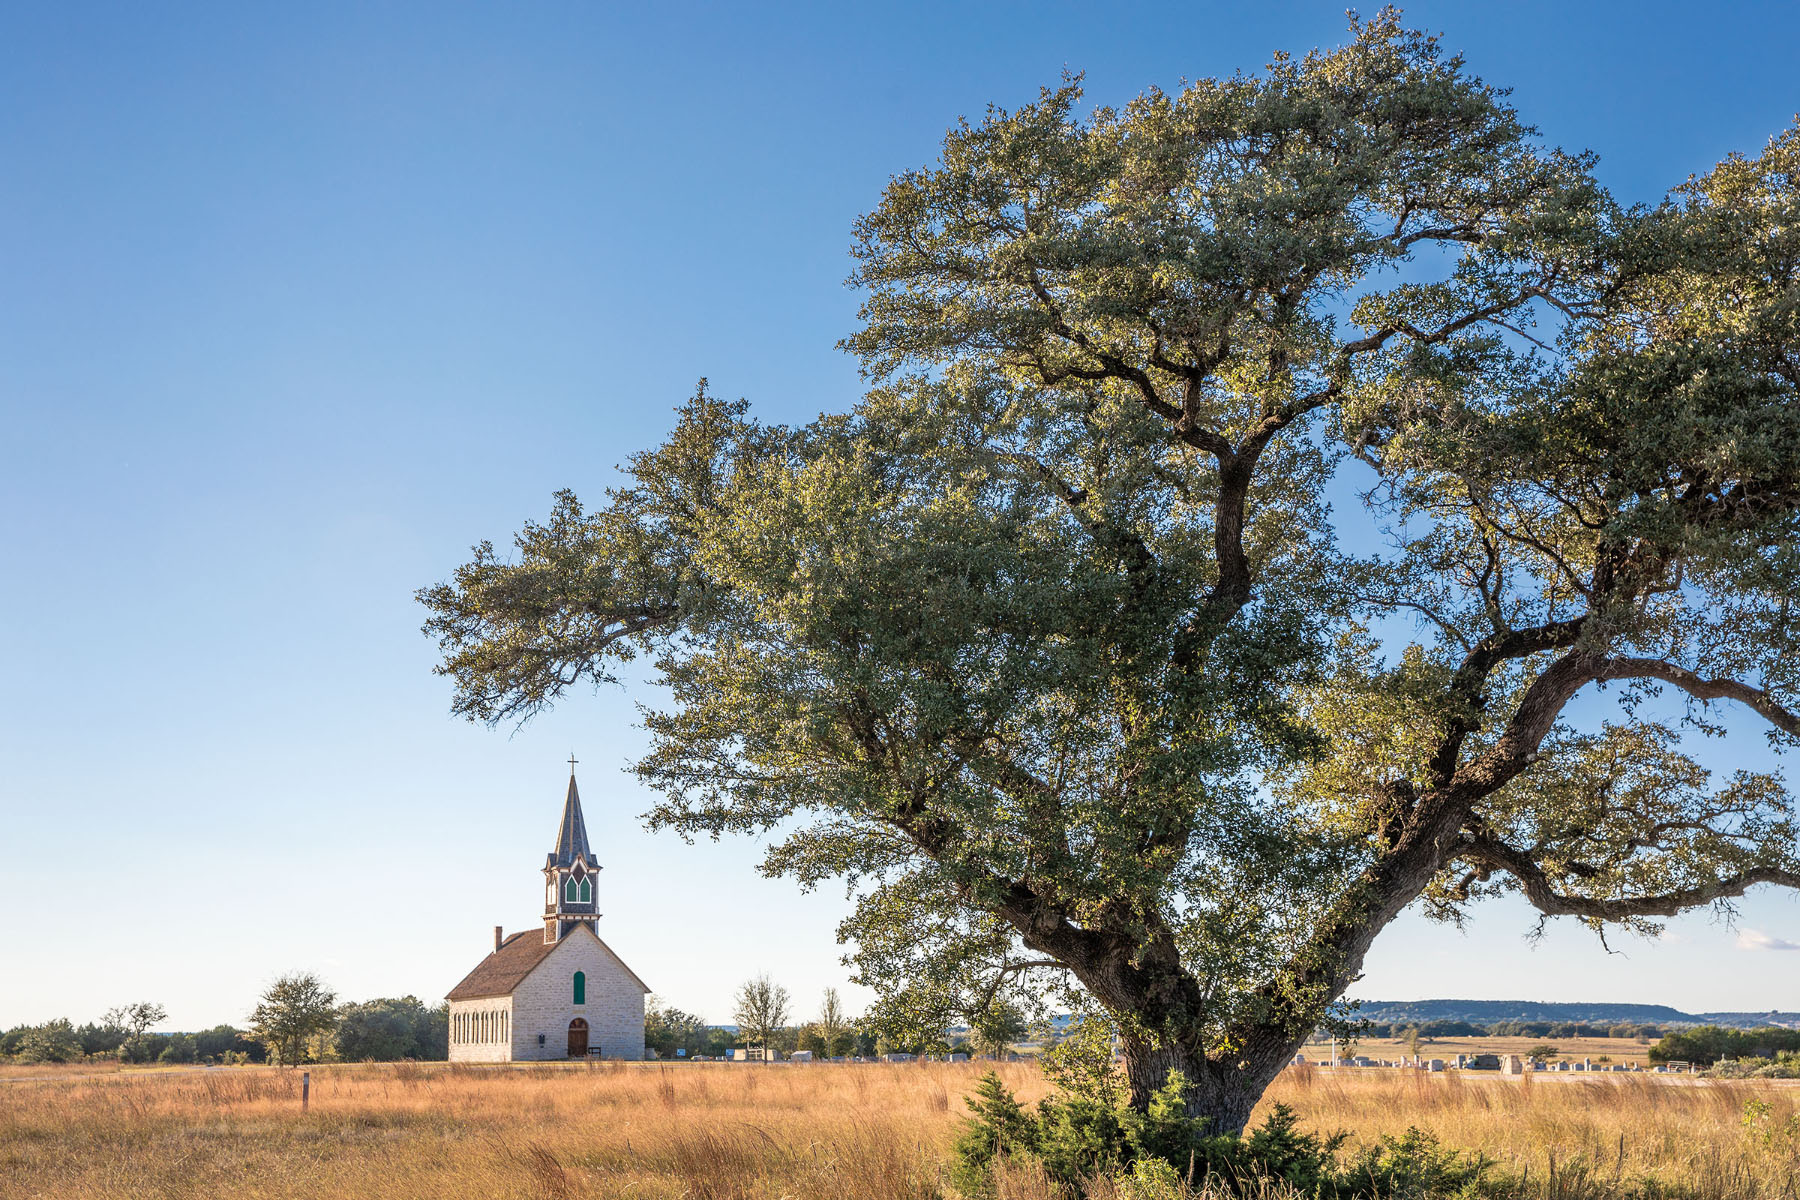 A white church in the background of a large Live Oak tree